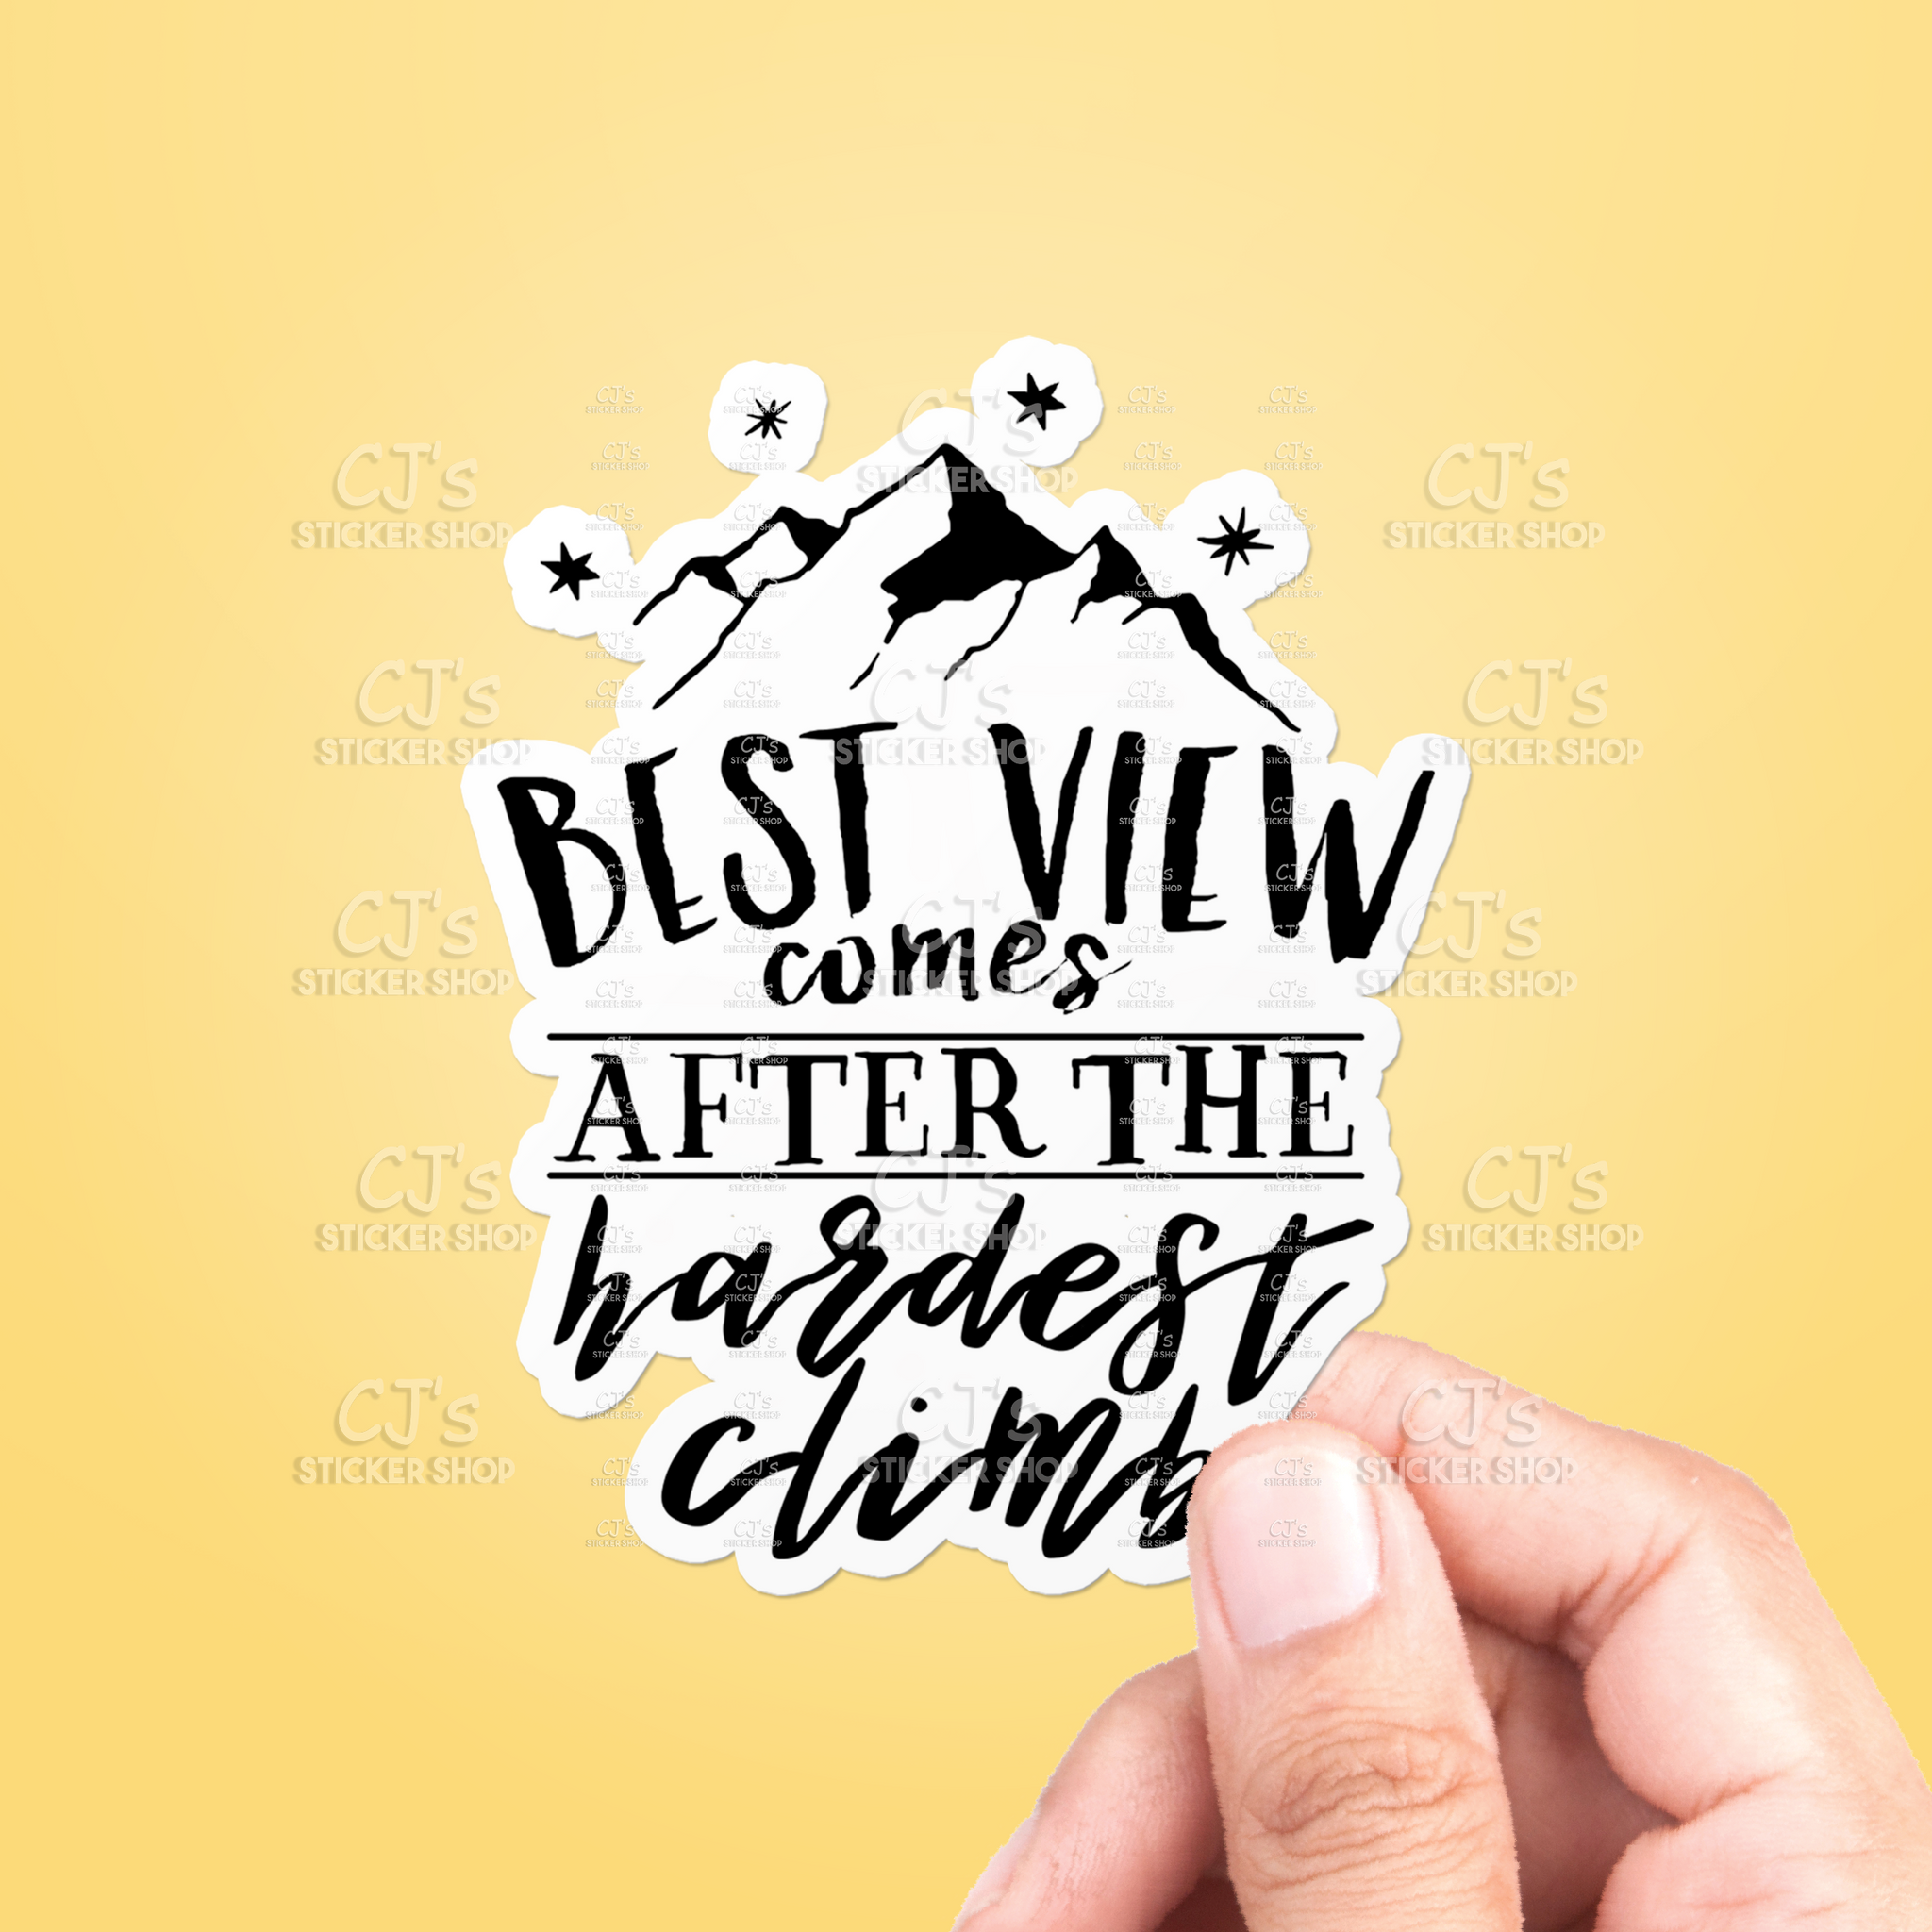 Best View Comes After The Hardest Climb Sticker